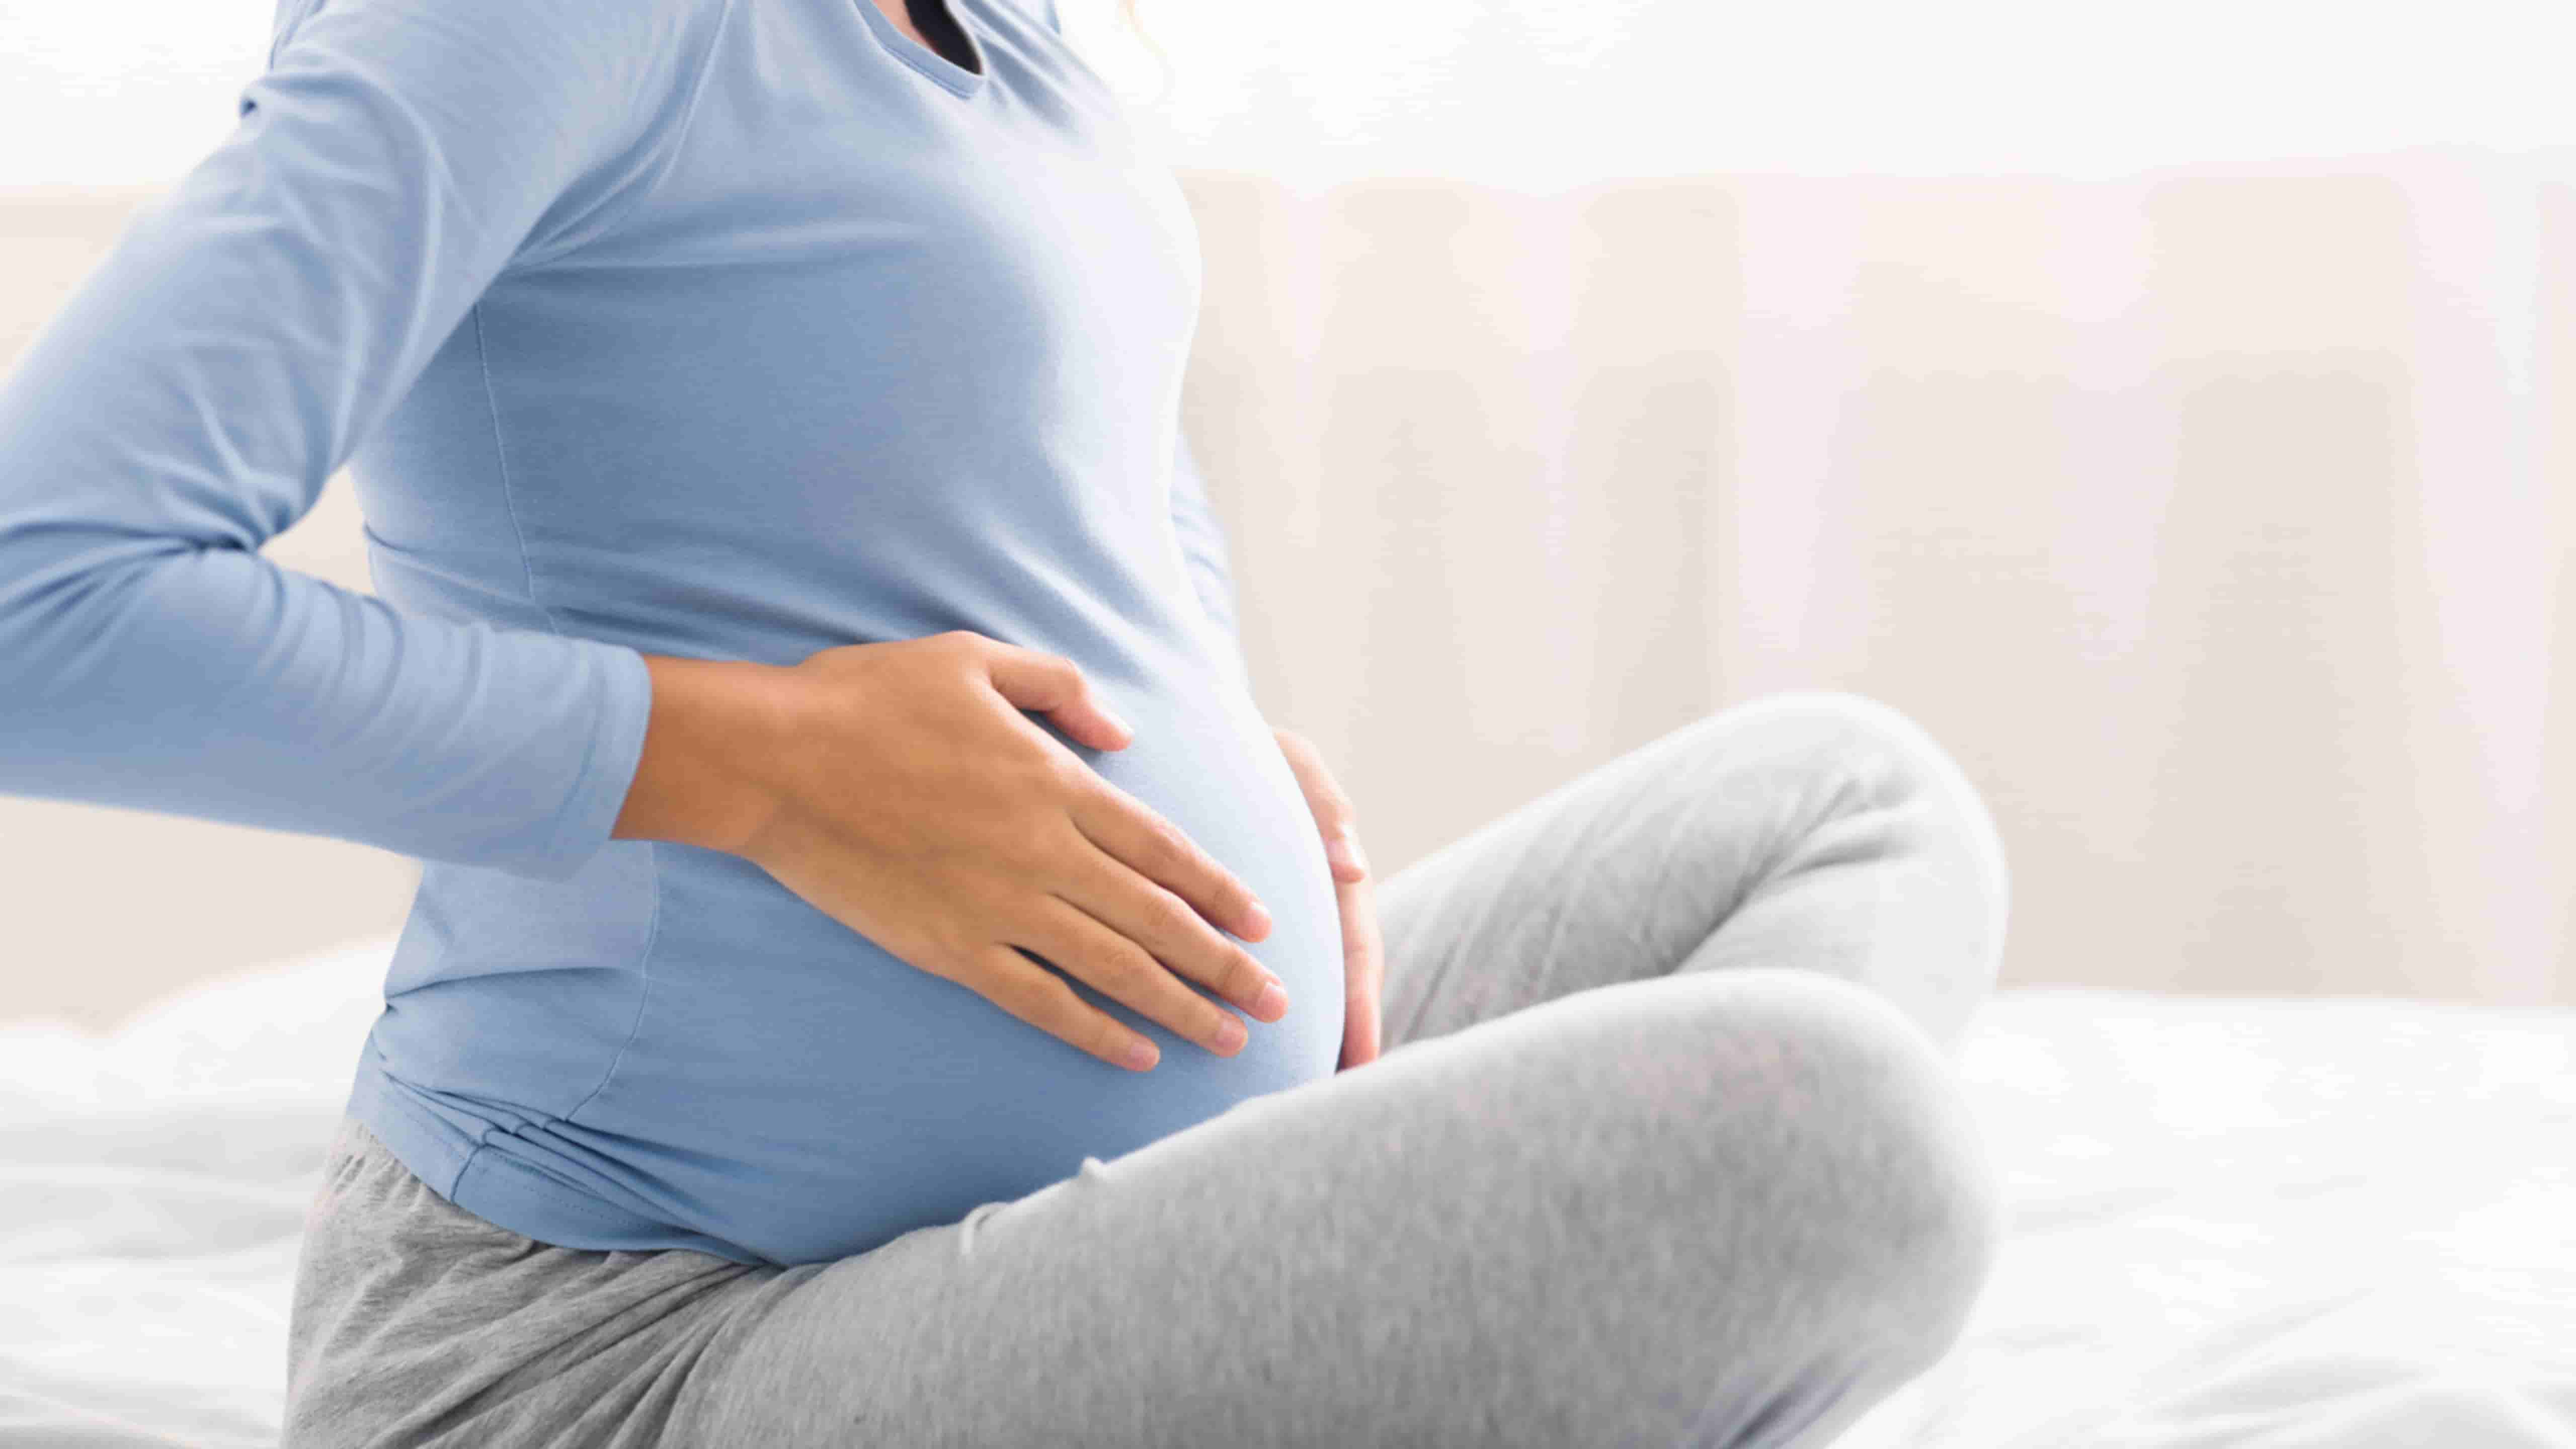 Monitoring Your Body: Tracking Post-Menstrual Symptoms That Indicate Possible Pregnancy